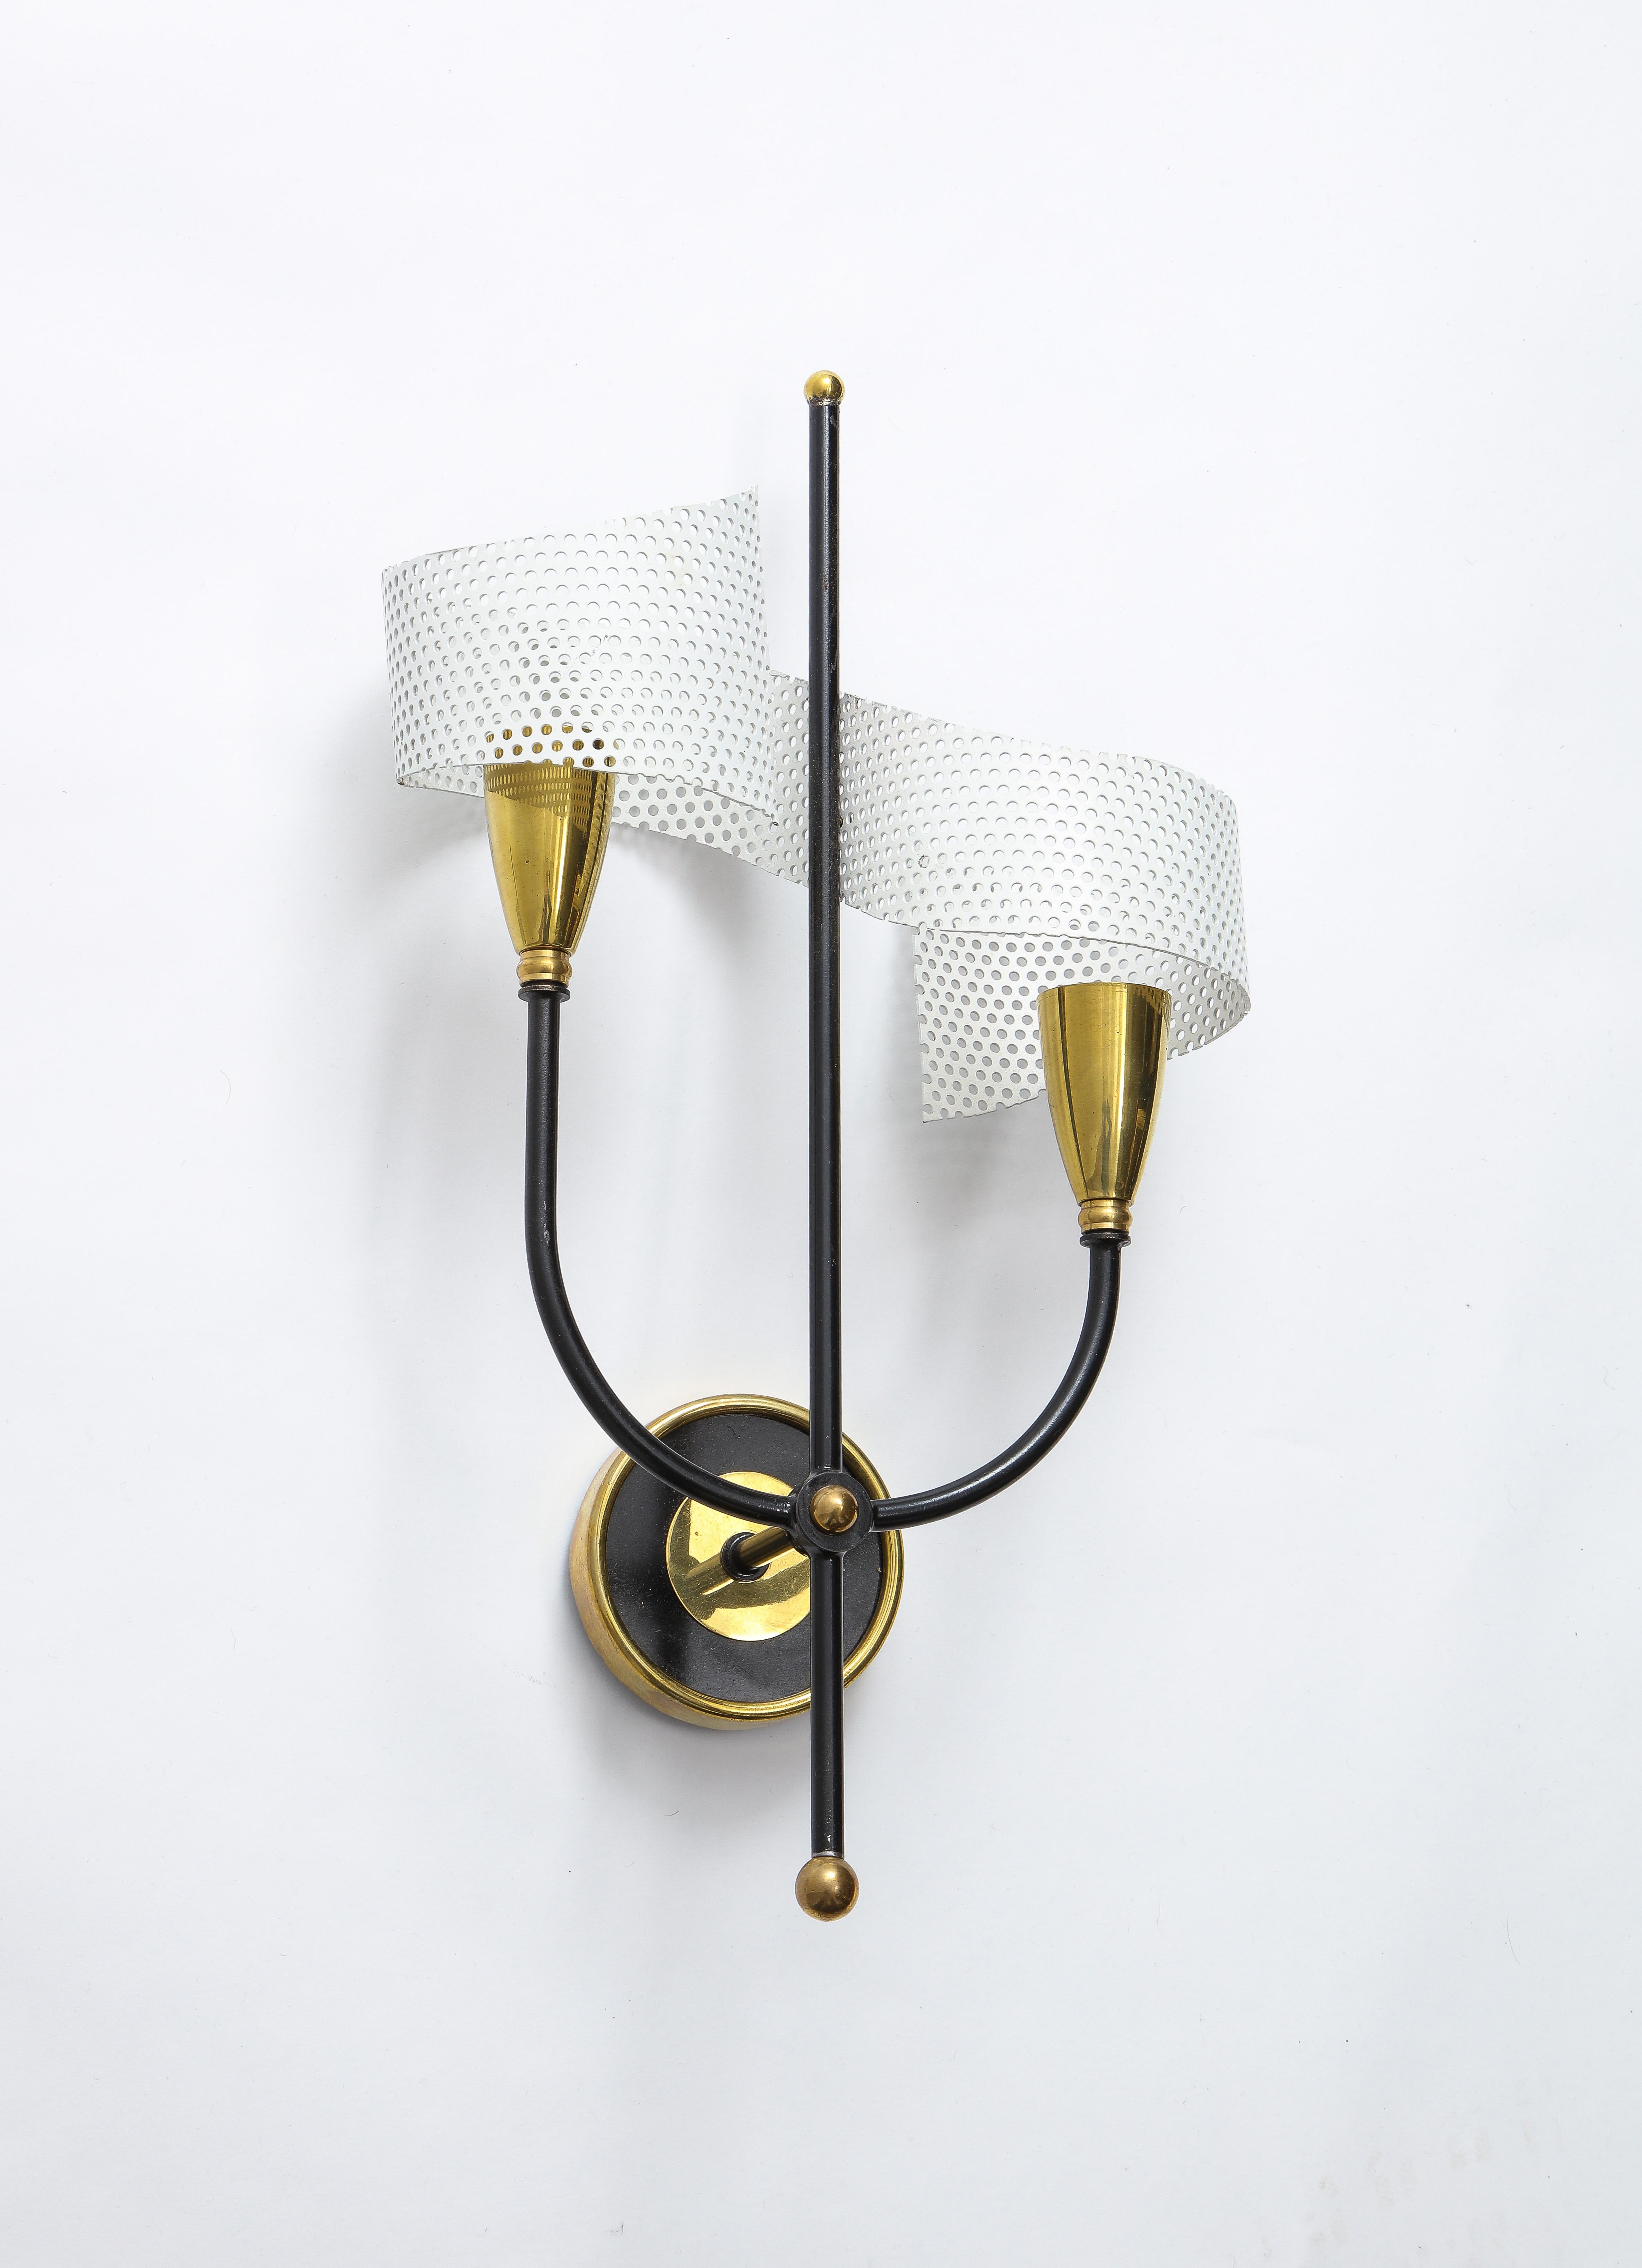 Pair of Scrolled Sconces in Brass and Aluminium by Mathieu, France, 1950s For Sale 1